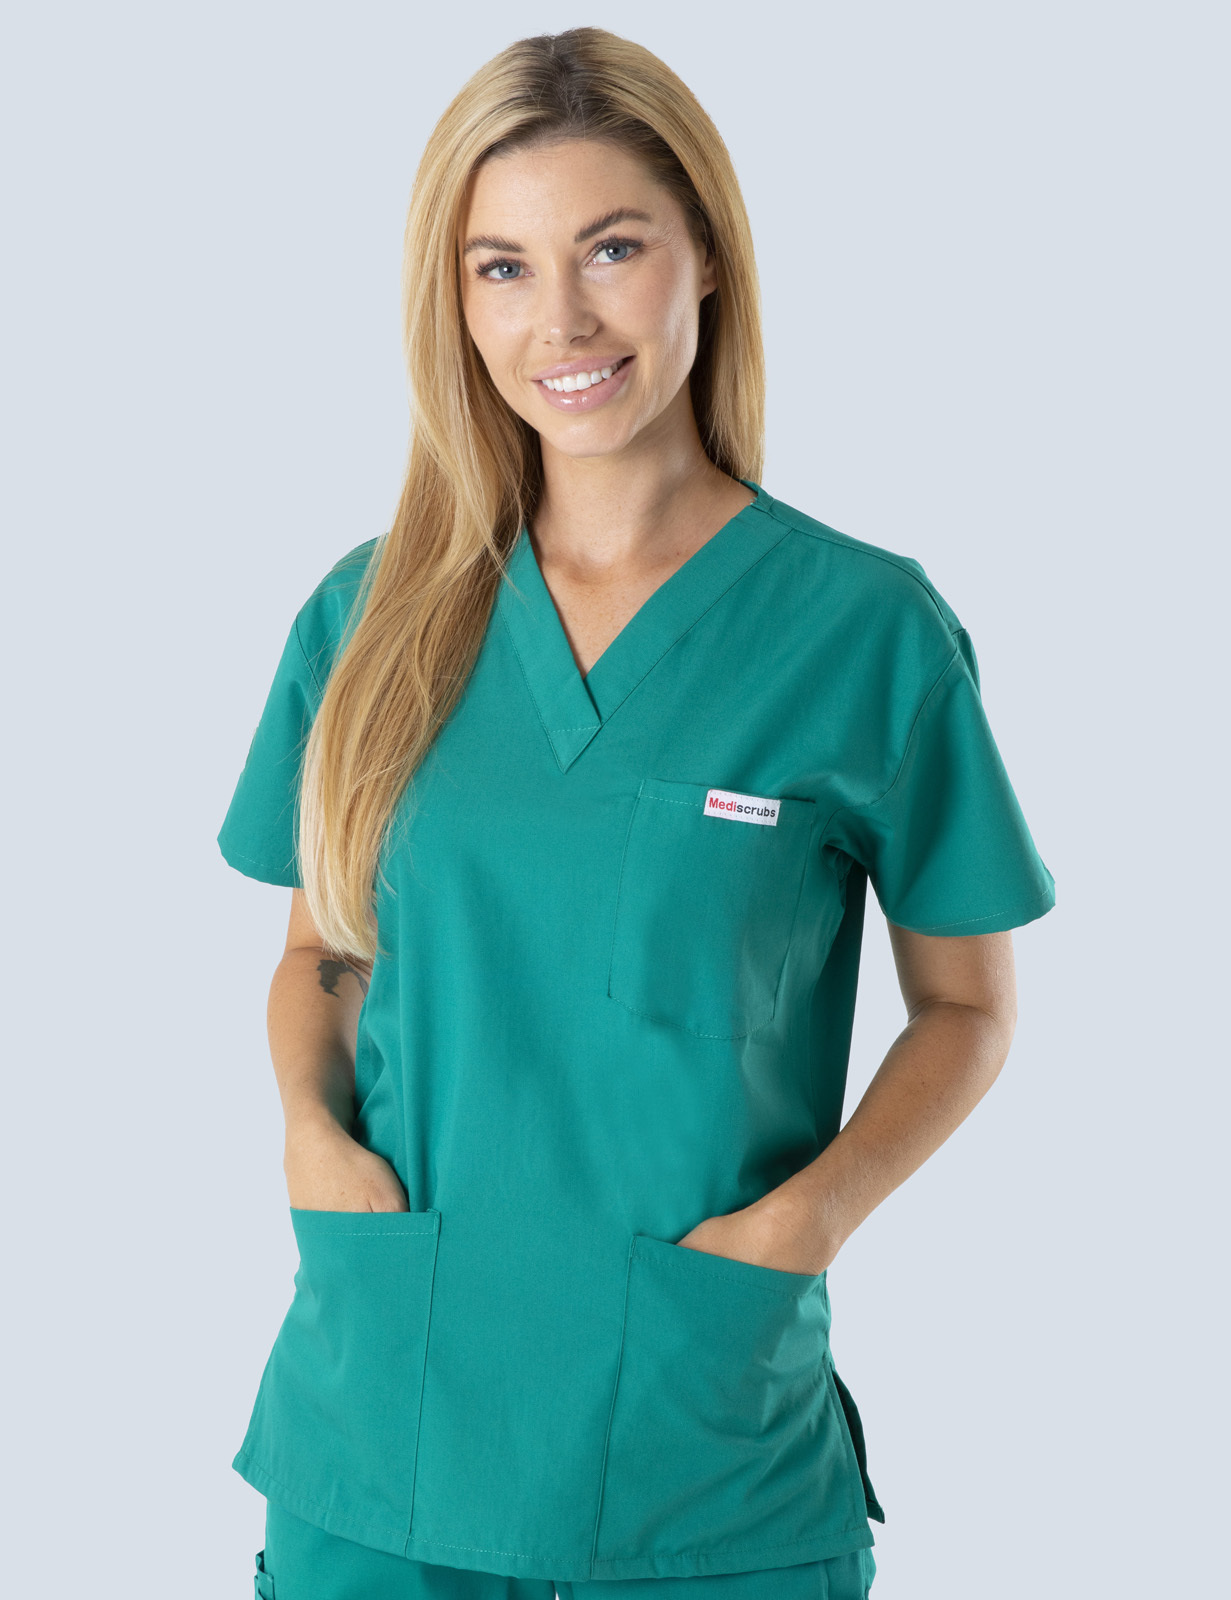 Children's Hospital Melbourne - ED (4 Pocket Scrub Top and Cargo Pants in Hunter incl Logos)